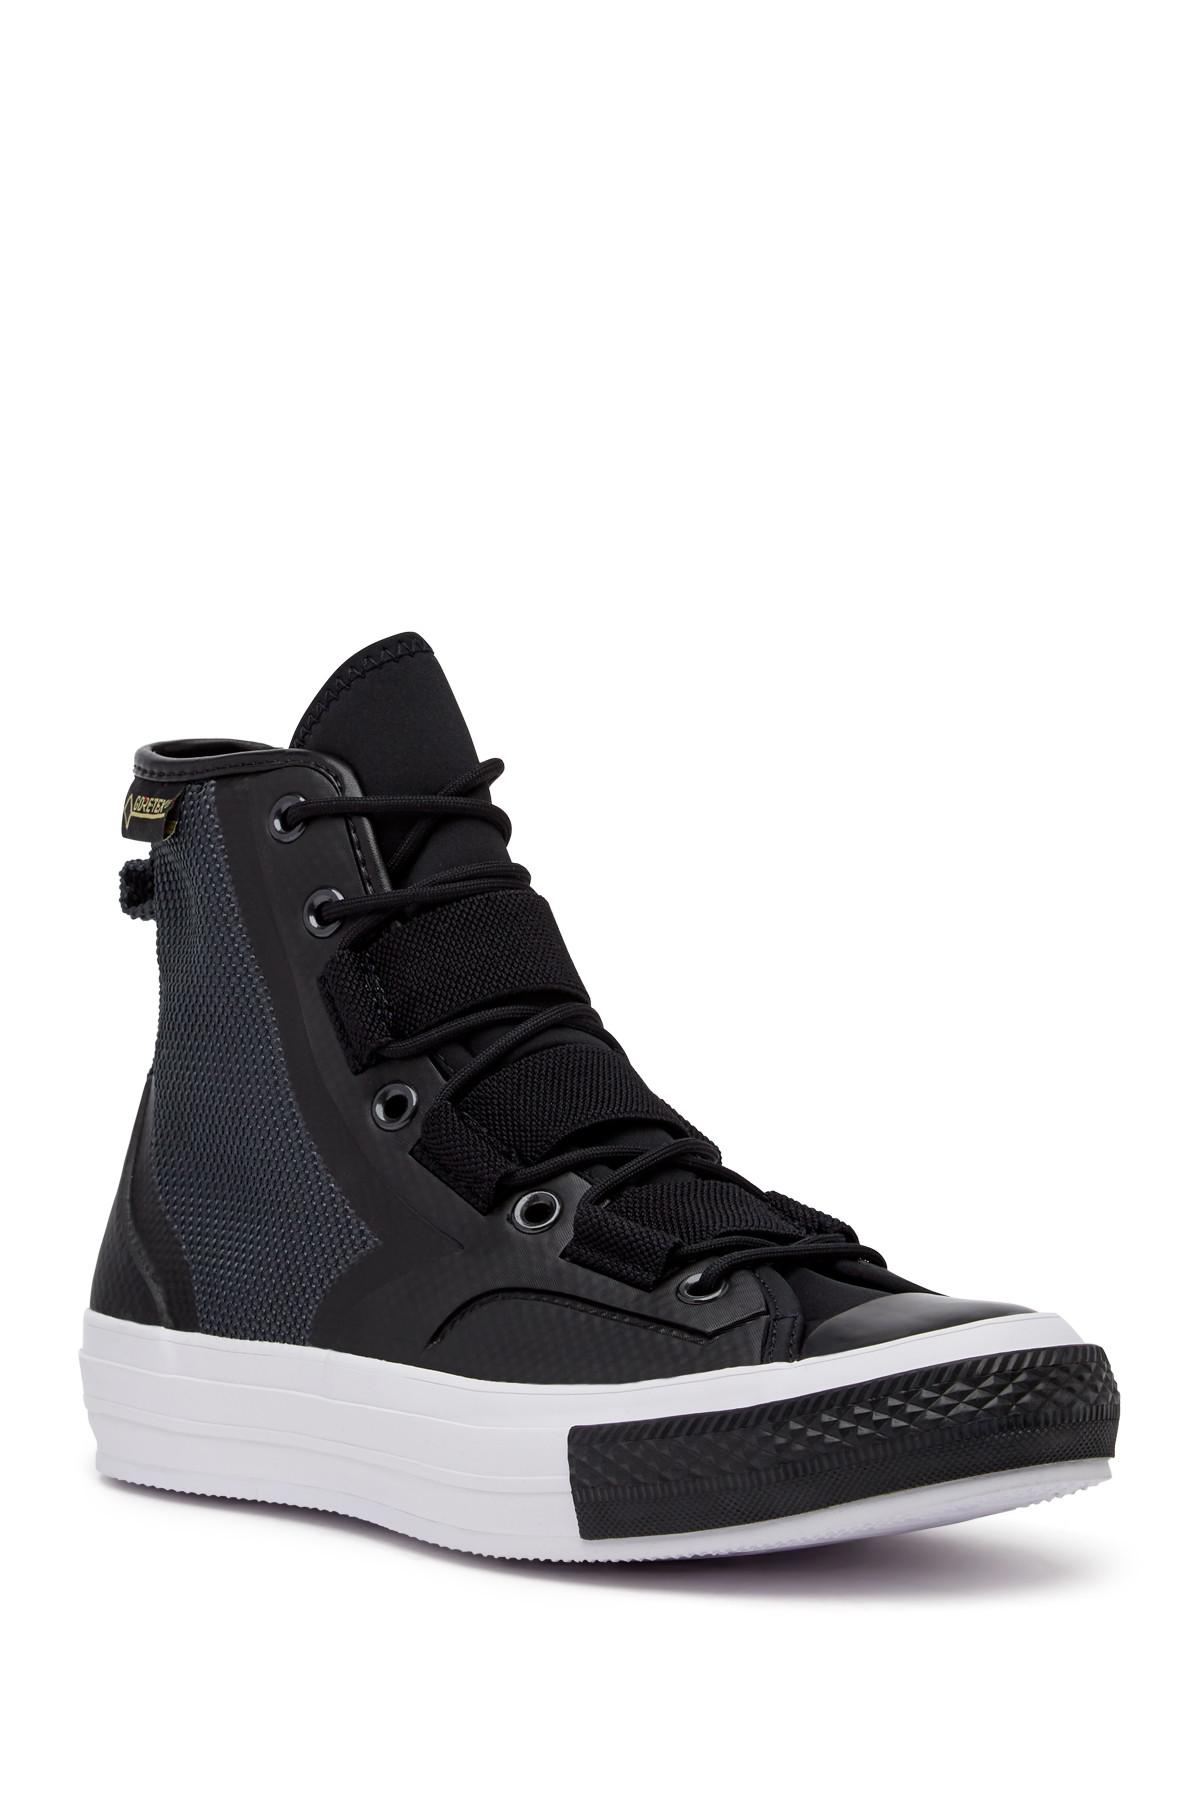 Converse Rubber Chuck Taylor All Star 70 Utility Hiker Hi Sneaker (unisex)  in Forest Night/bl (Black) for Men - Lyst